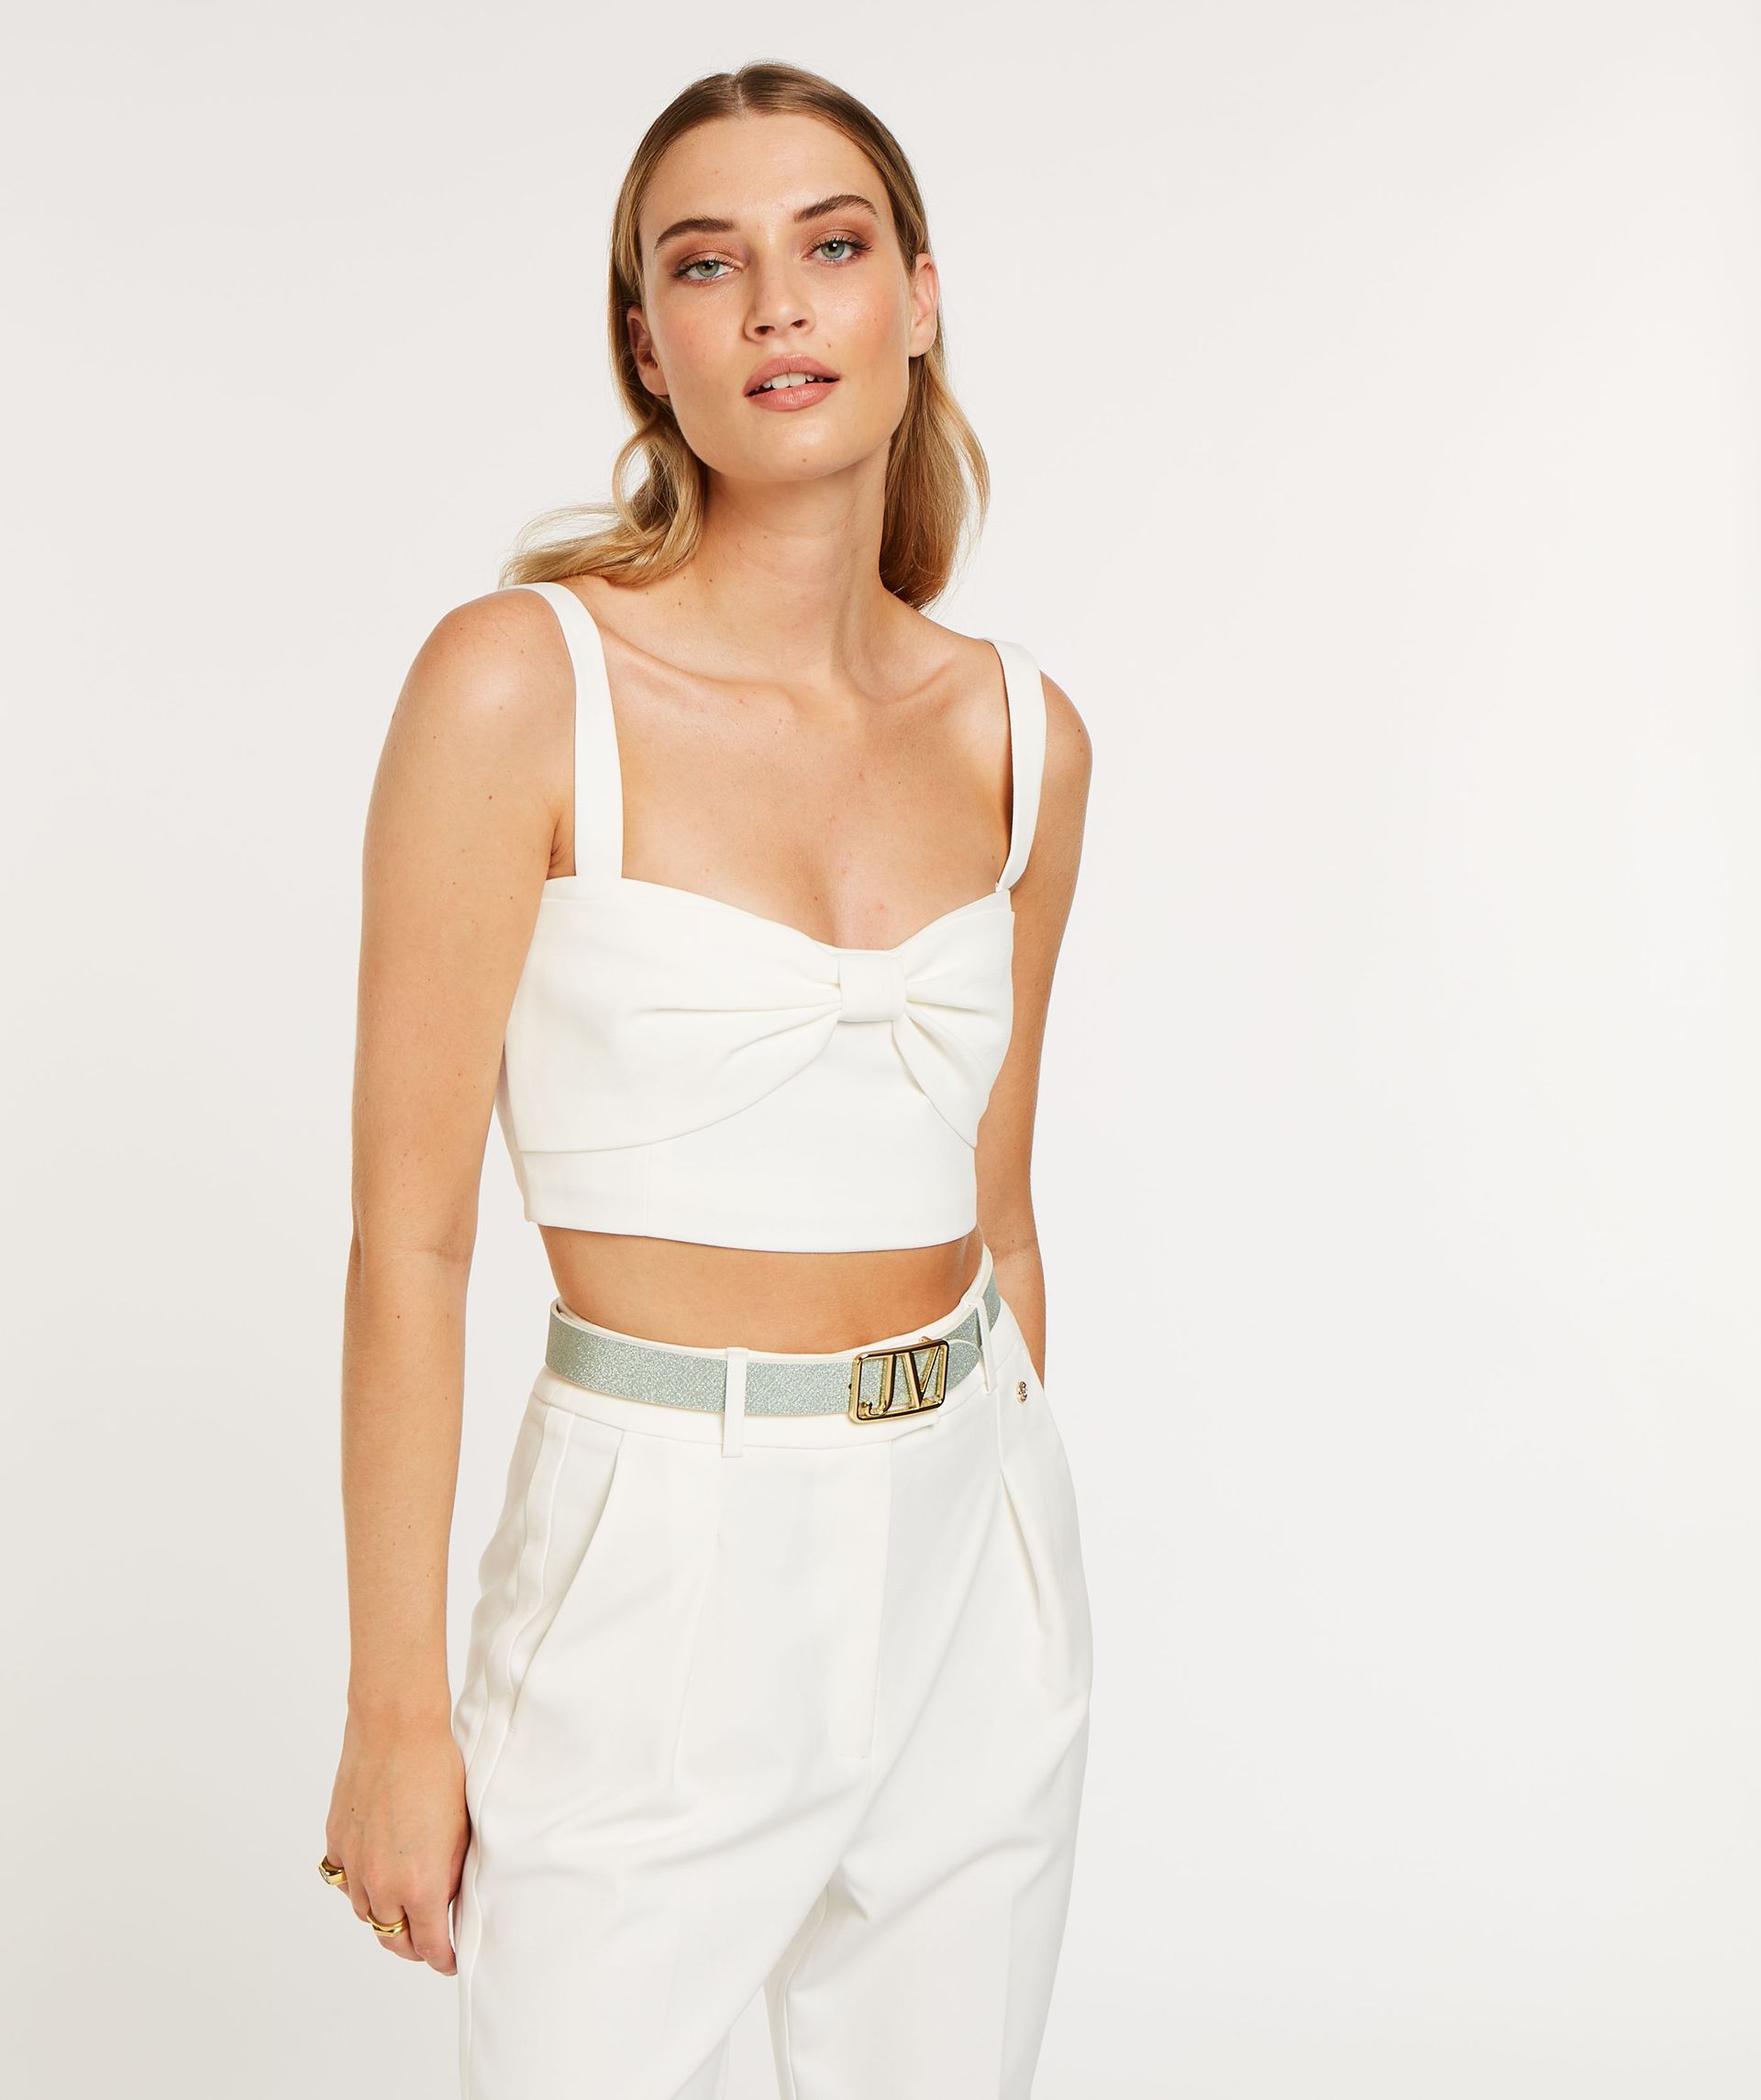 LAUDY fitted cropped top